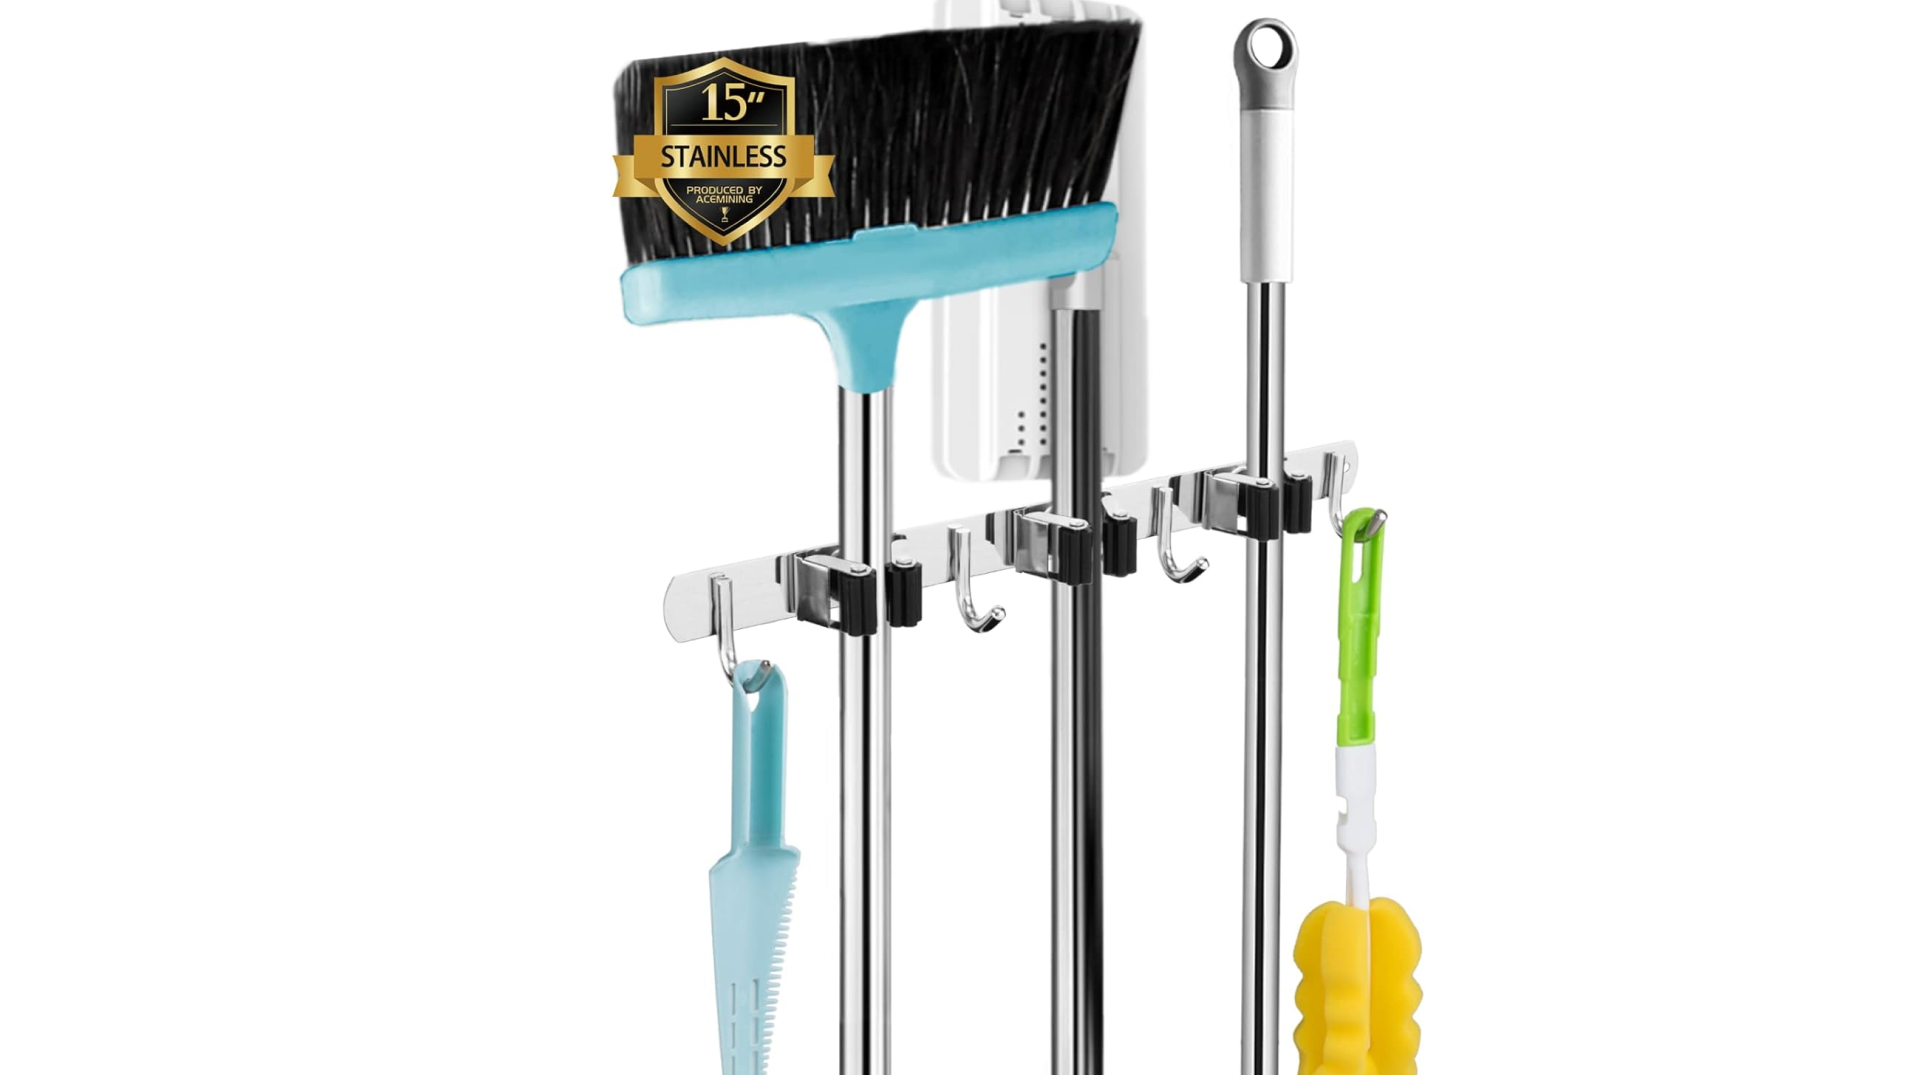 wall mount for brooms and cleaning supplies